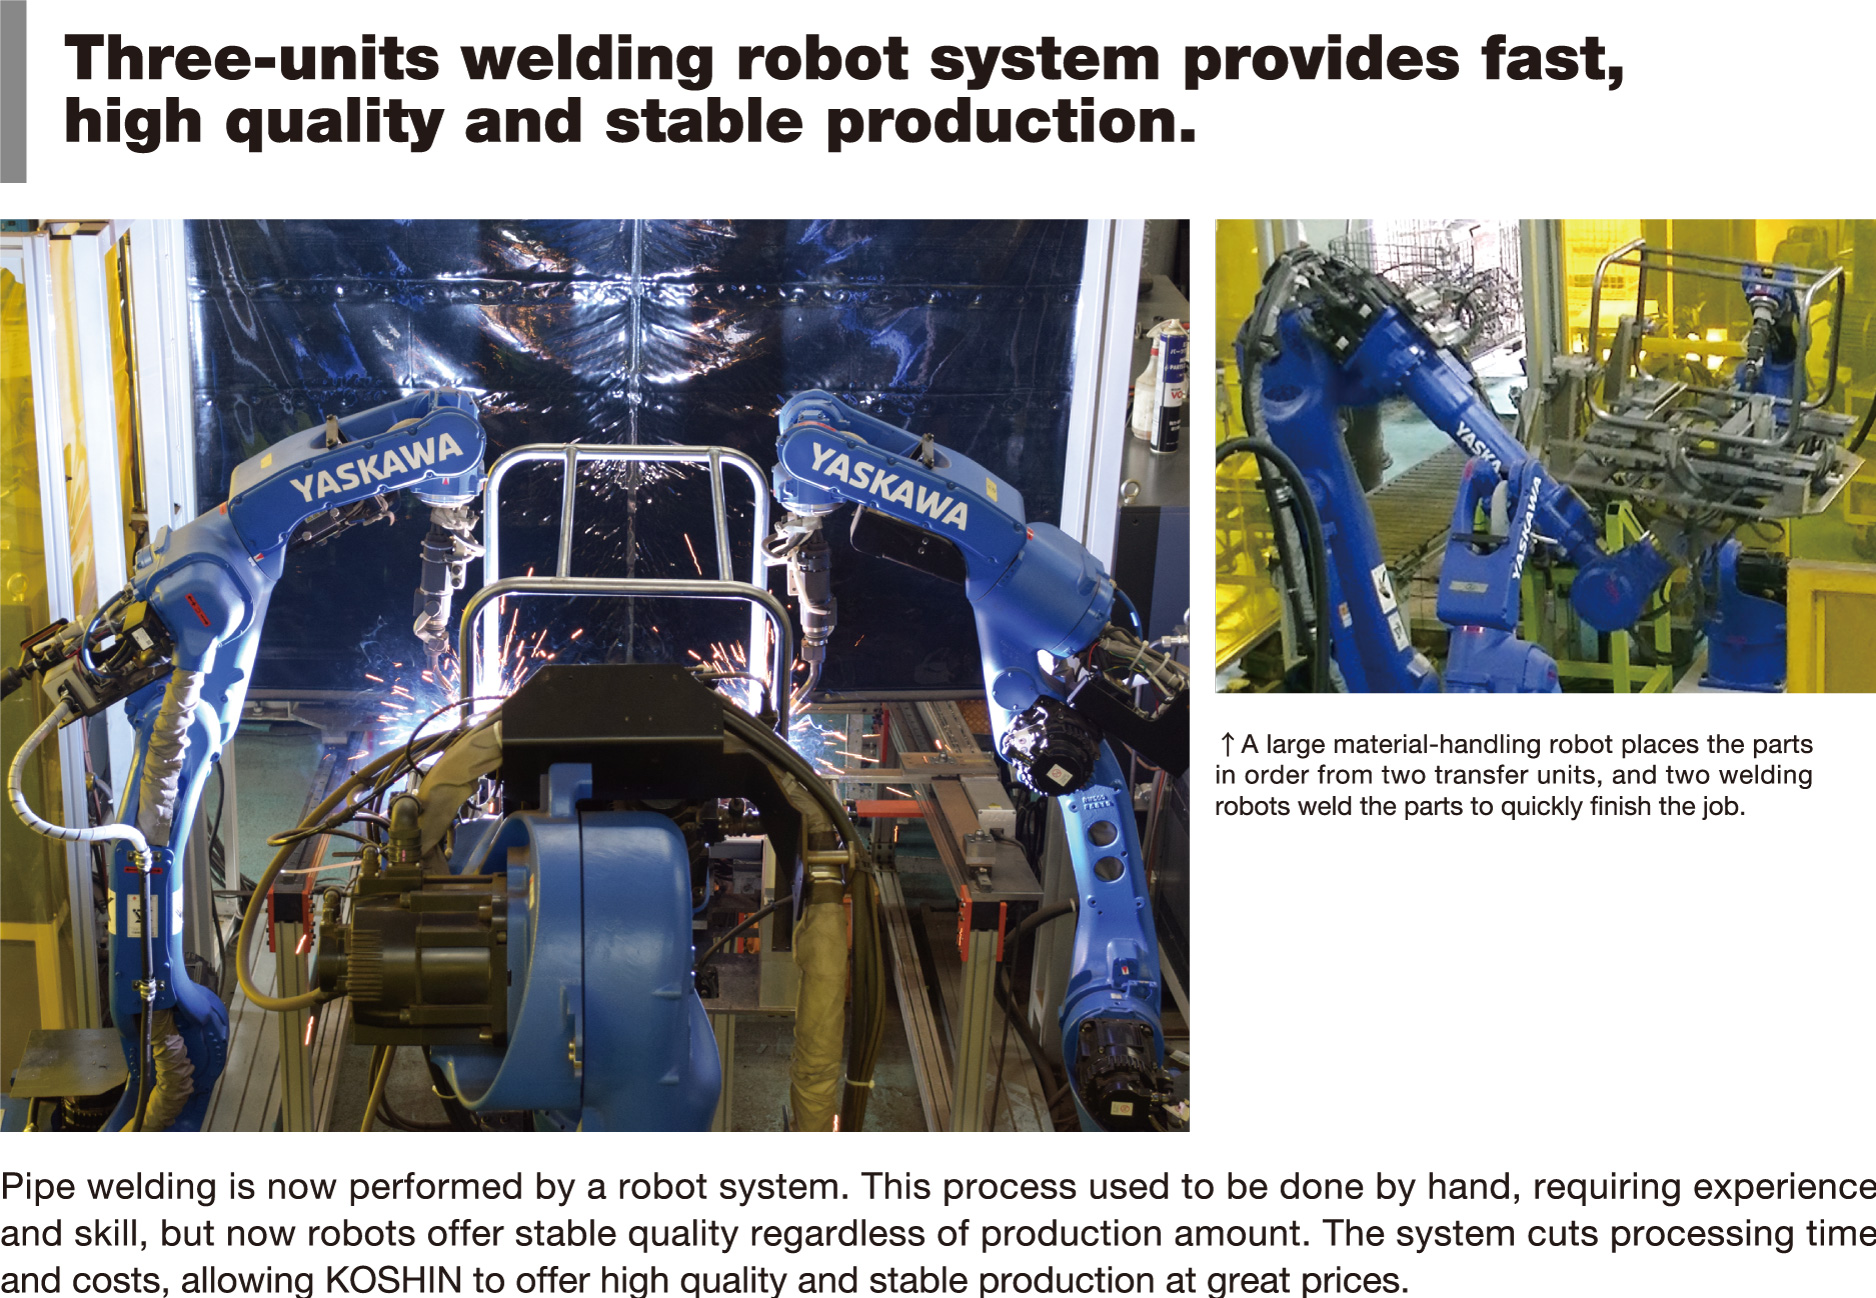 Three-units welding robot system provides fast, high quality and stable production.